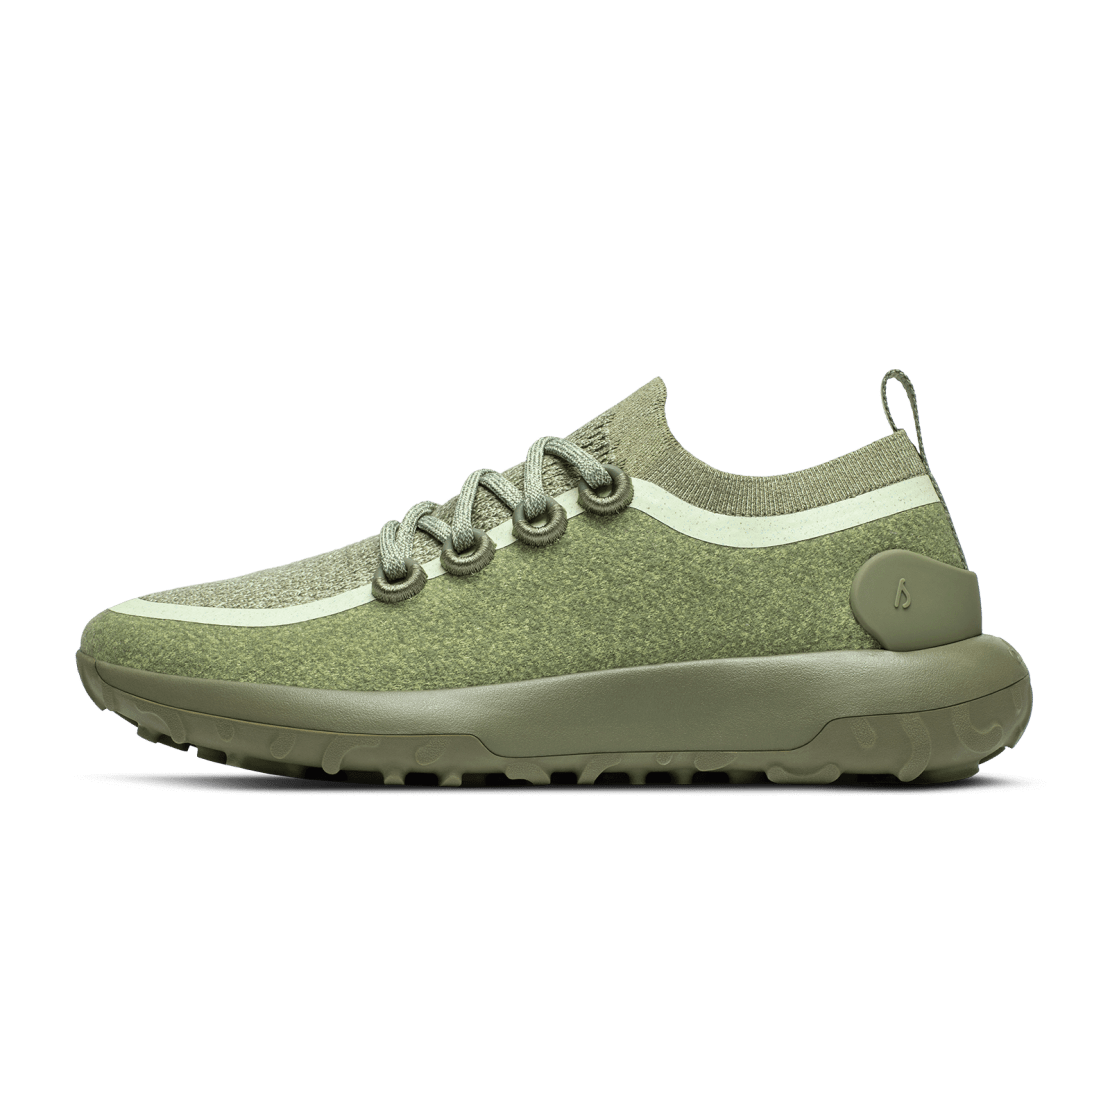 AA004TW090 SHOE PROFILE GLOBAL WOMENS TRAIL RUNNER SWT MIZZLE CALM CARGO FORAGE-GREEN